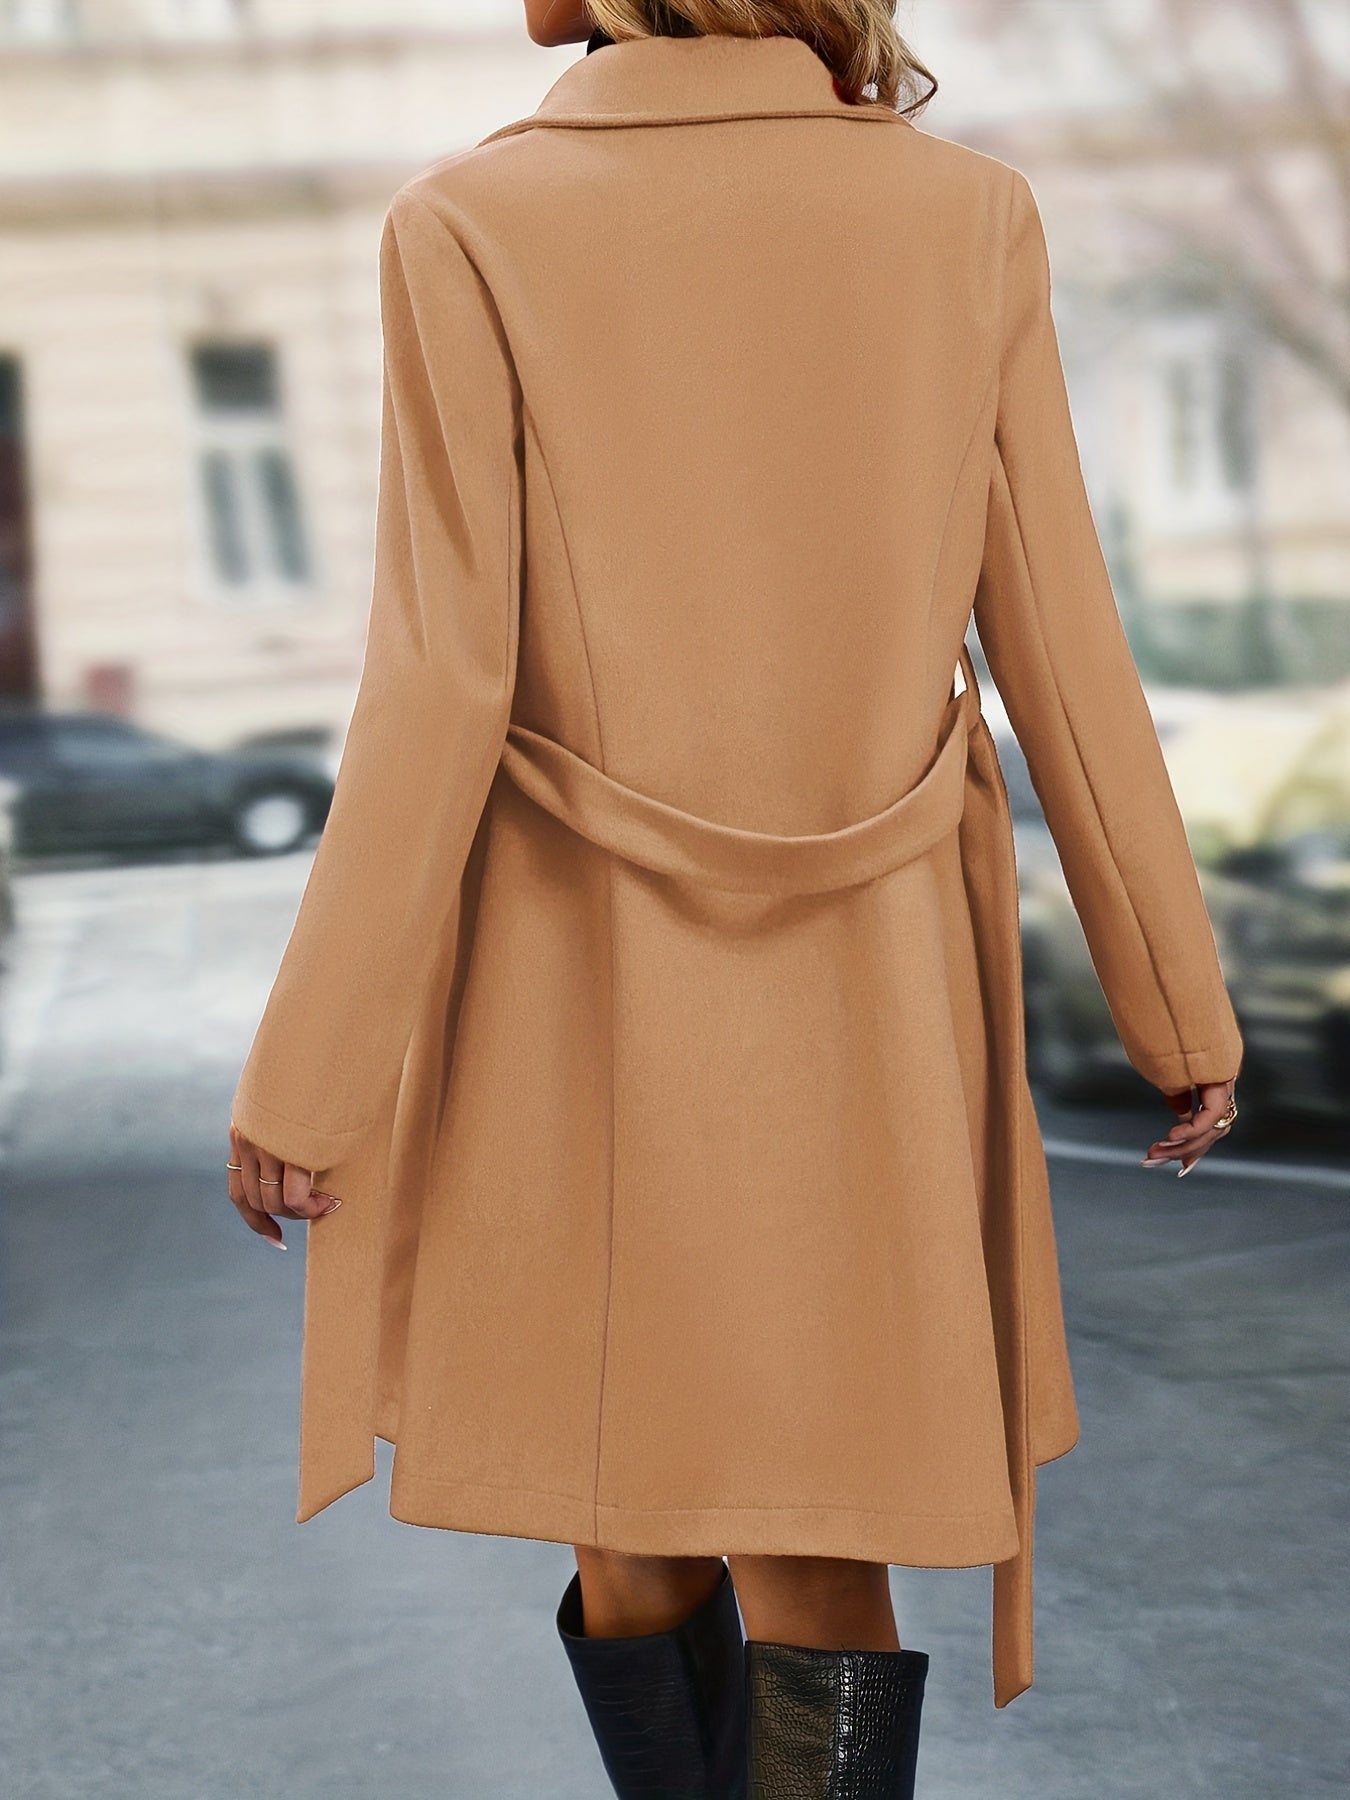 Elegant Double Breasted Trench Coat - Women's Outerwear, Solid Color, Non-Stretch Fabric, Regular Fit - Tress's Beauty